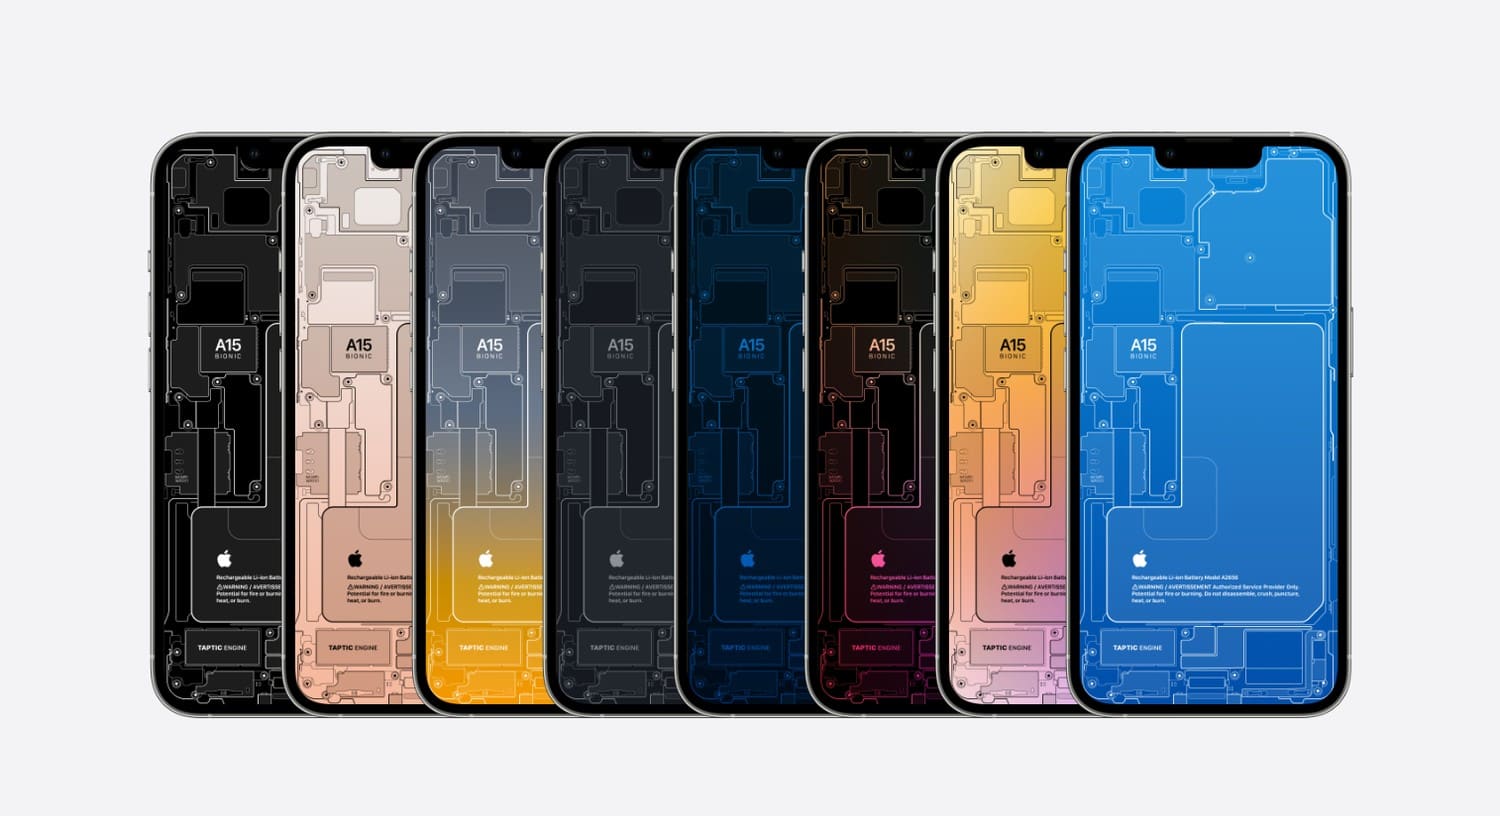 See what's inside your iPhone with these beautifully detailed wallpapers